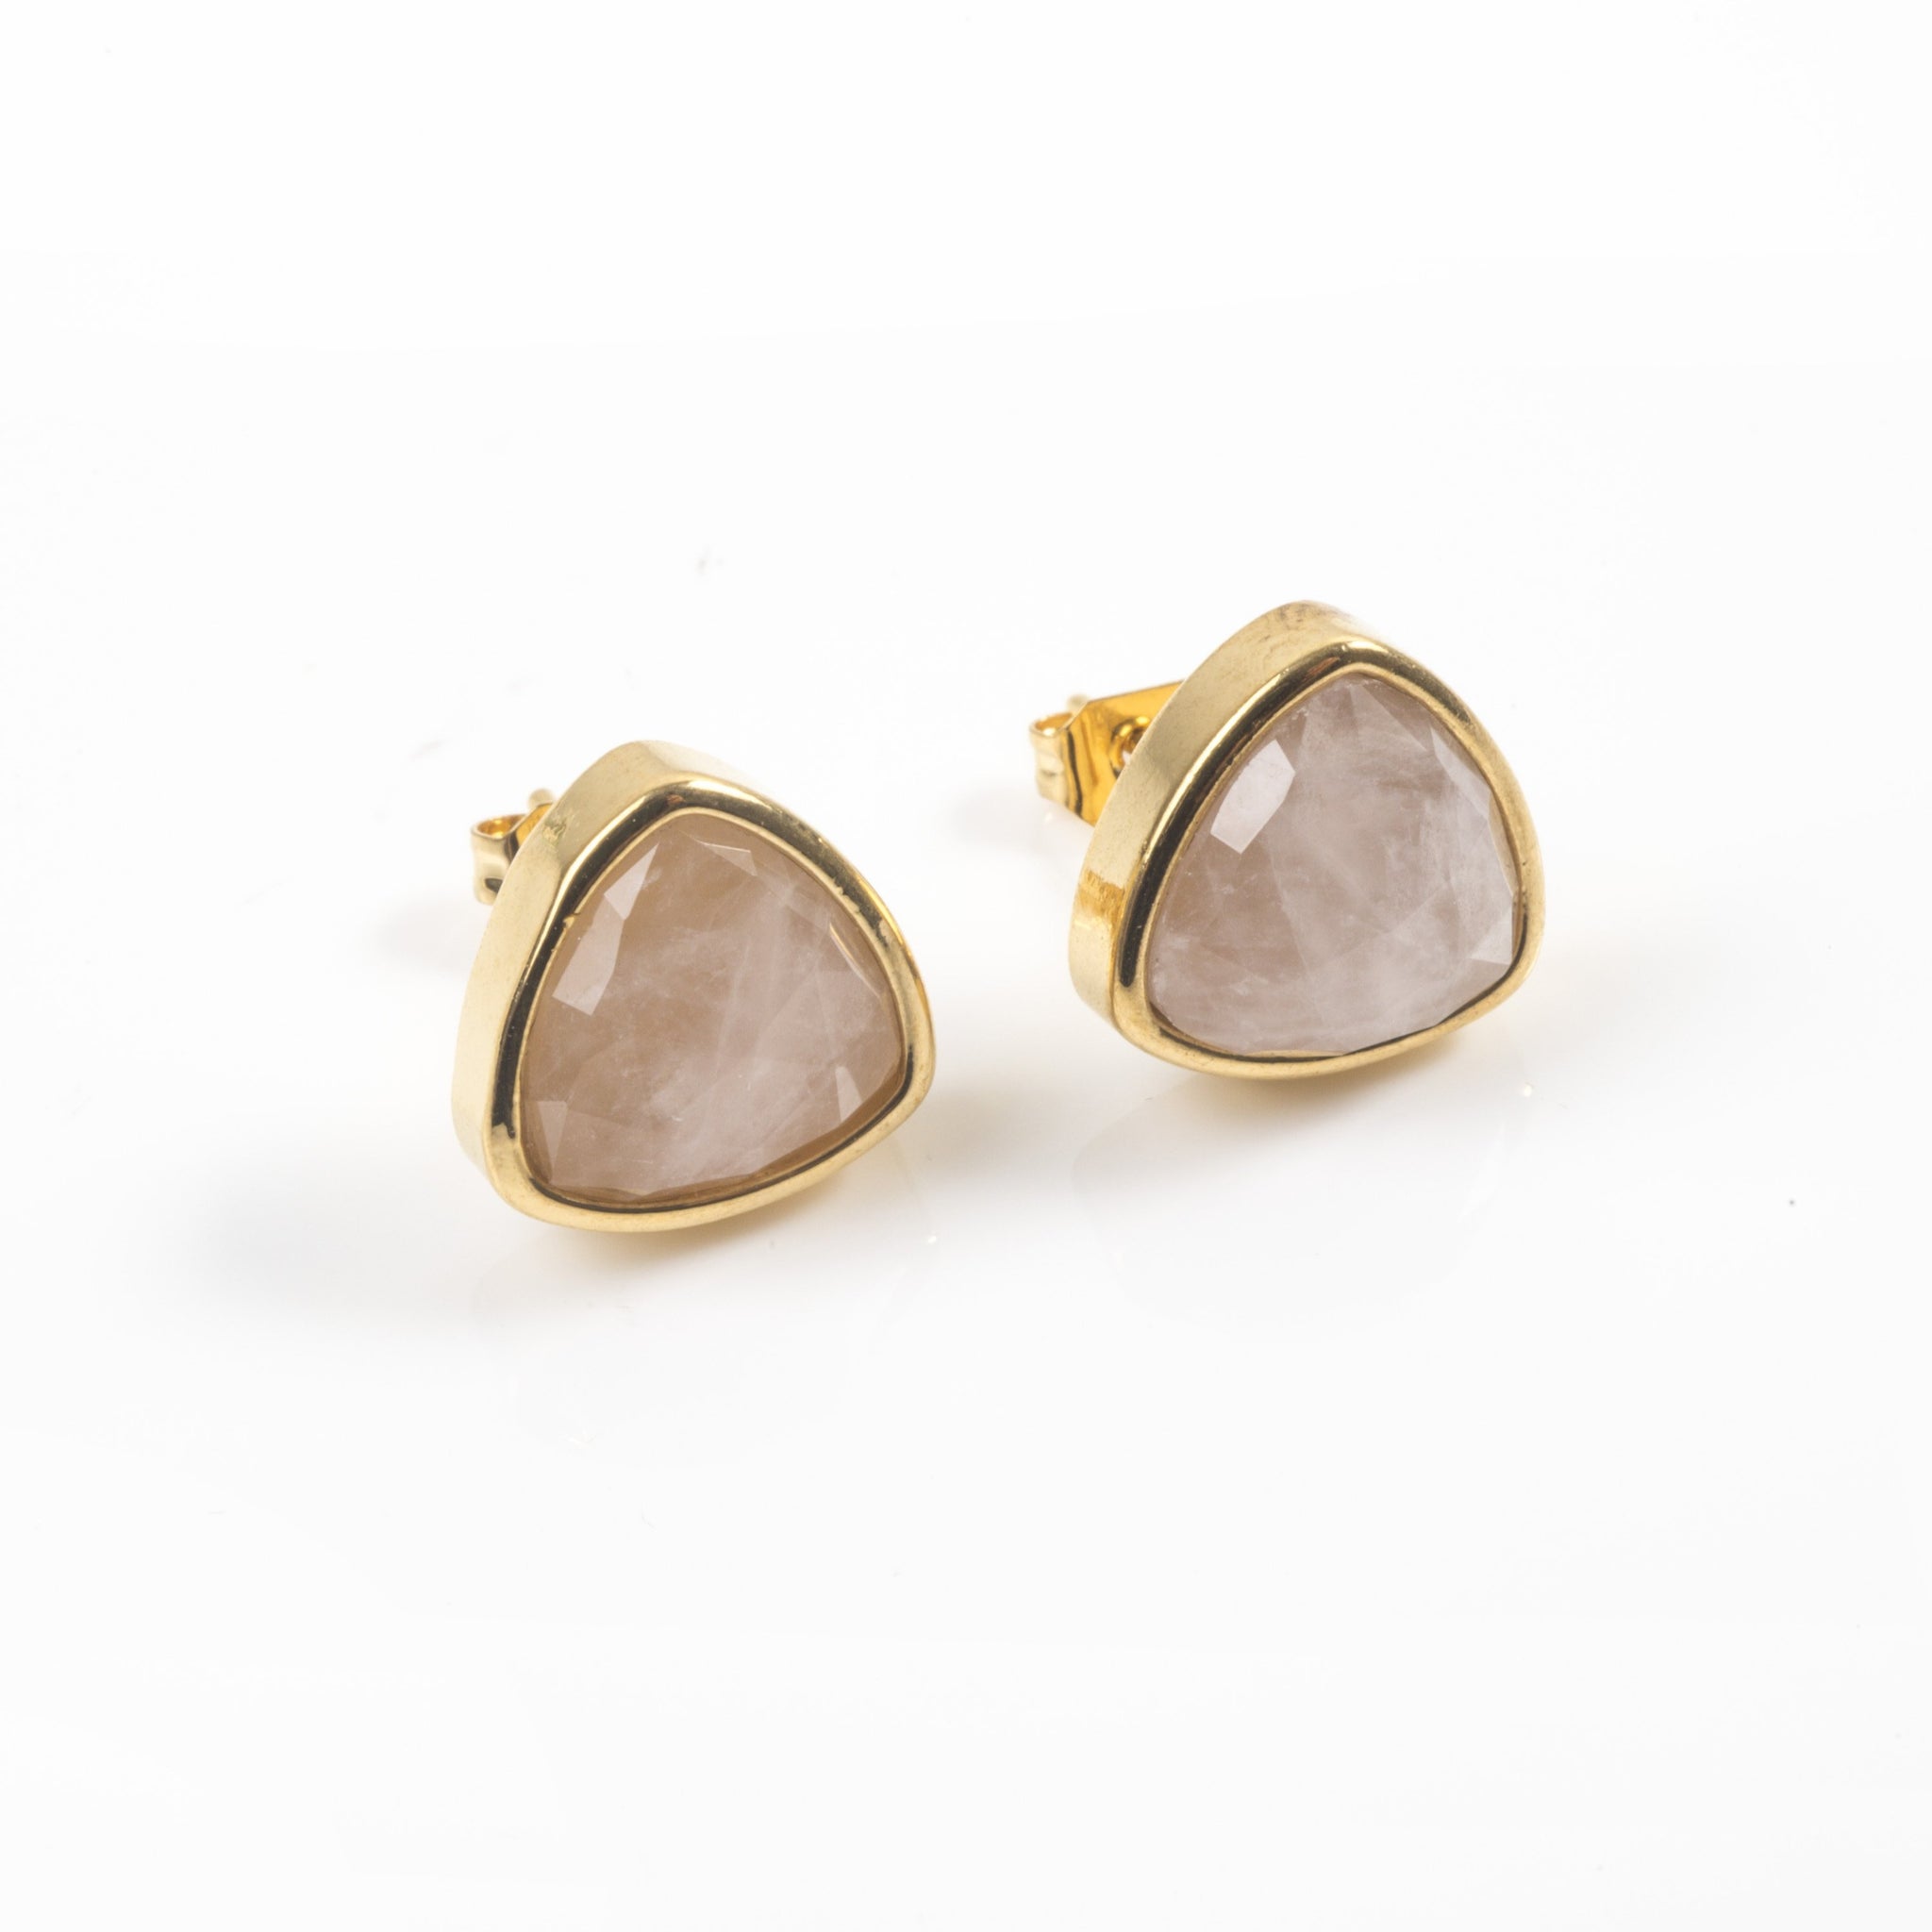 Thomas Sabo Rose Gold Plated Rose Quartz Light of Luna Stud Earrings   Jewellery from Francis  Gaye Jewellers UK